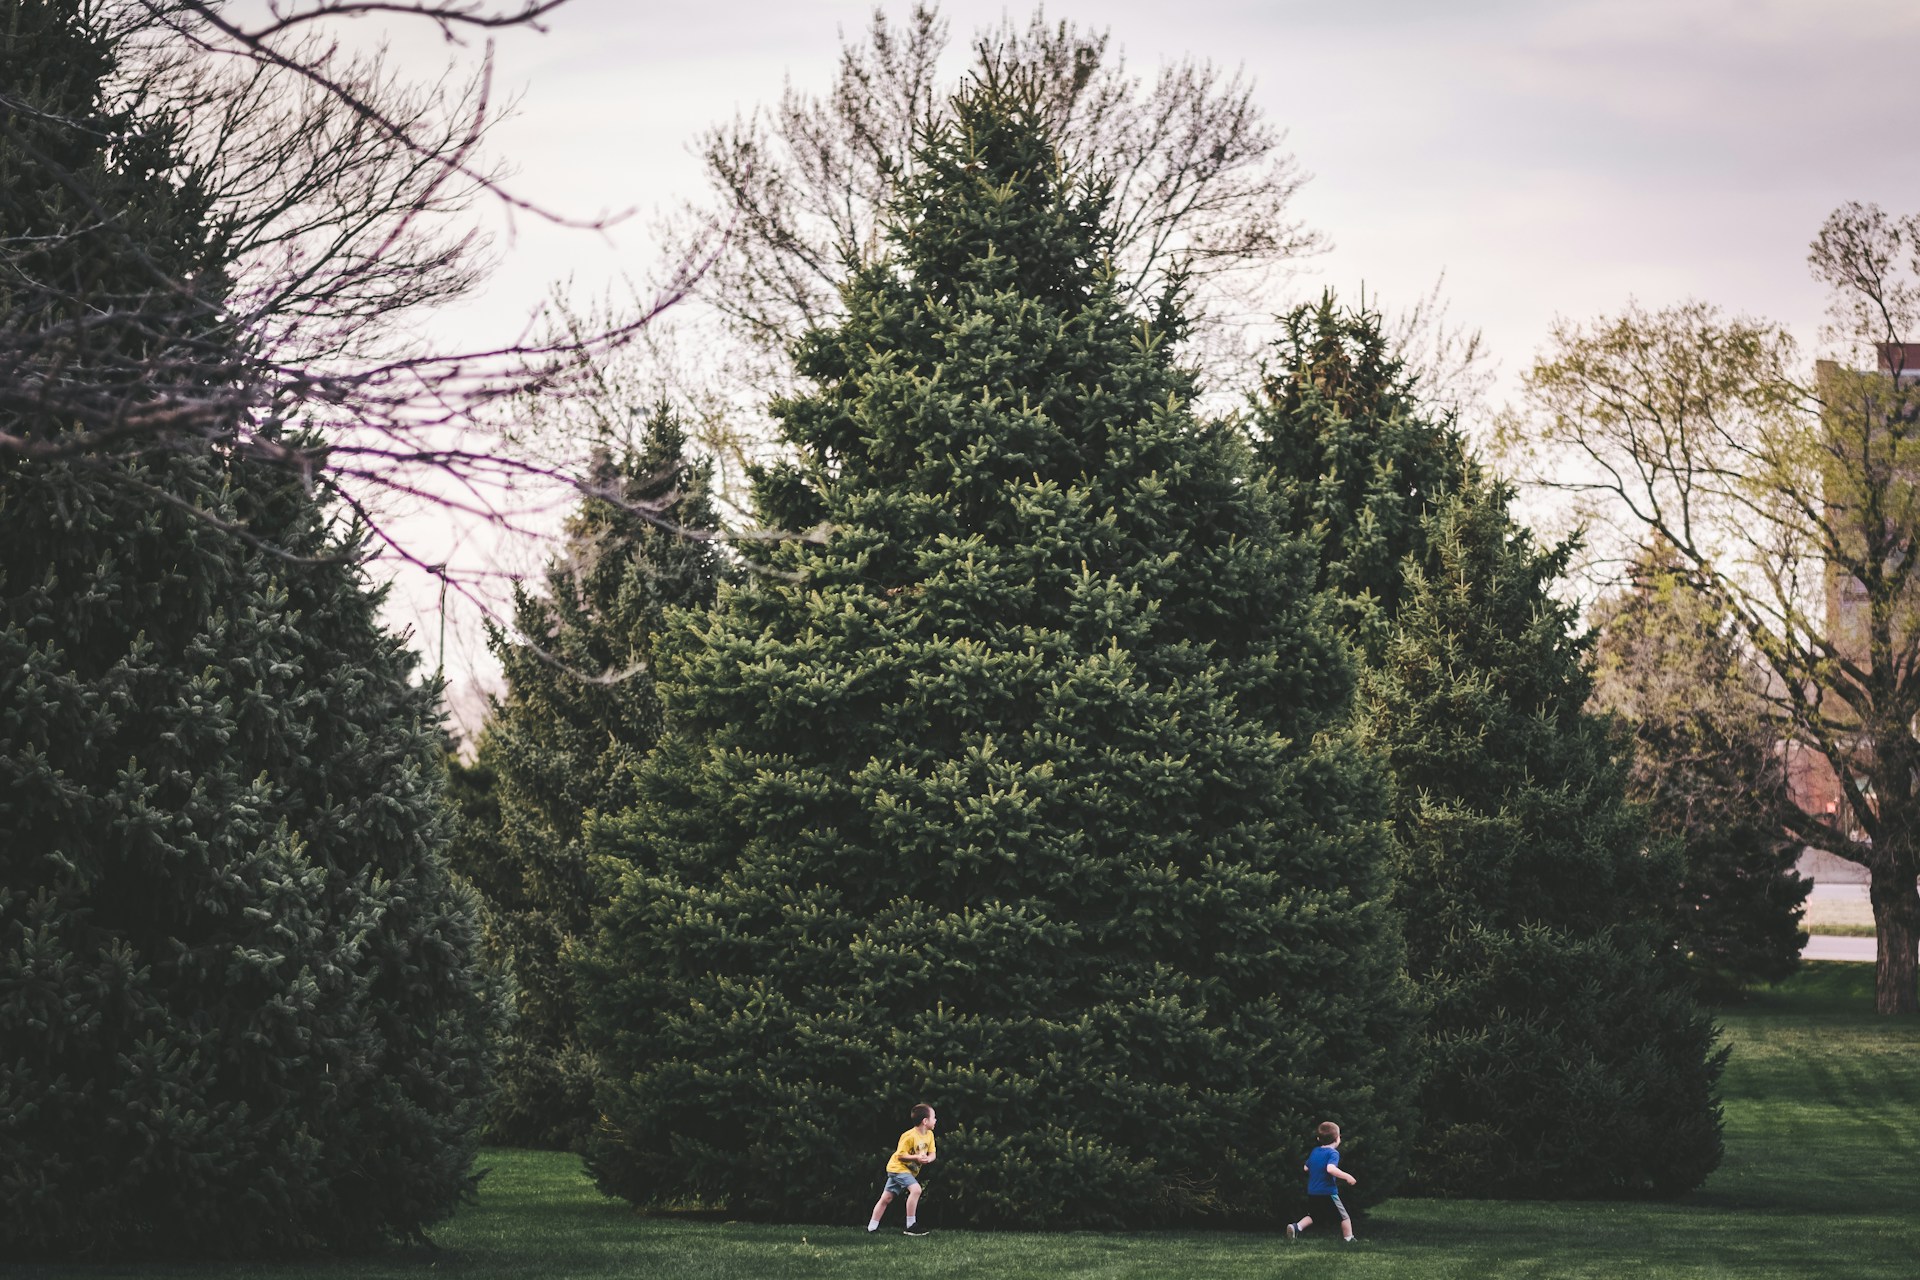 Two children are running on a grassy area next to several large evergreen trees. The sky is overcast, and the trees are lush and green, with some bare branches visible on the left side of the image. The scene looks calm and natural, reminiscent of serene grounds found near a mental health treatment center.